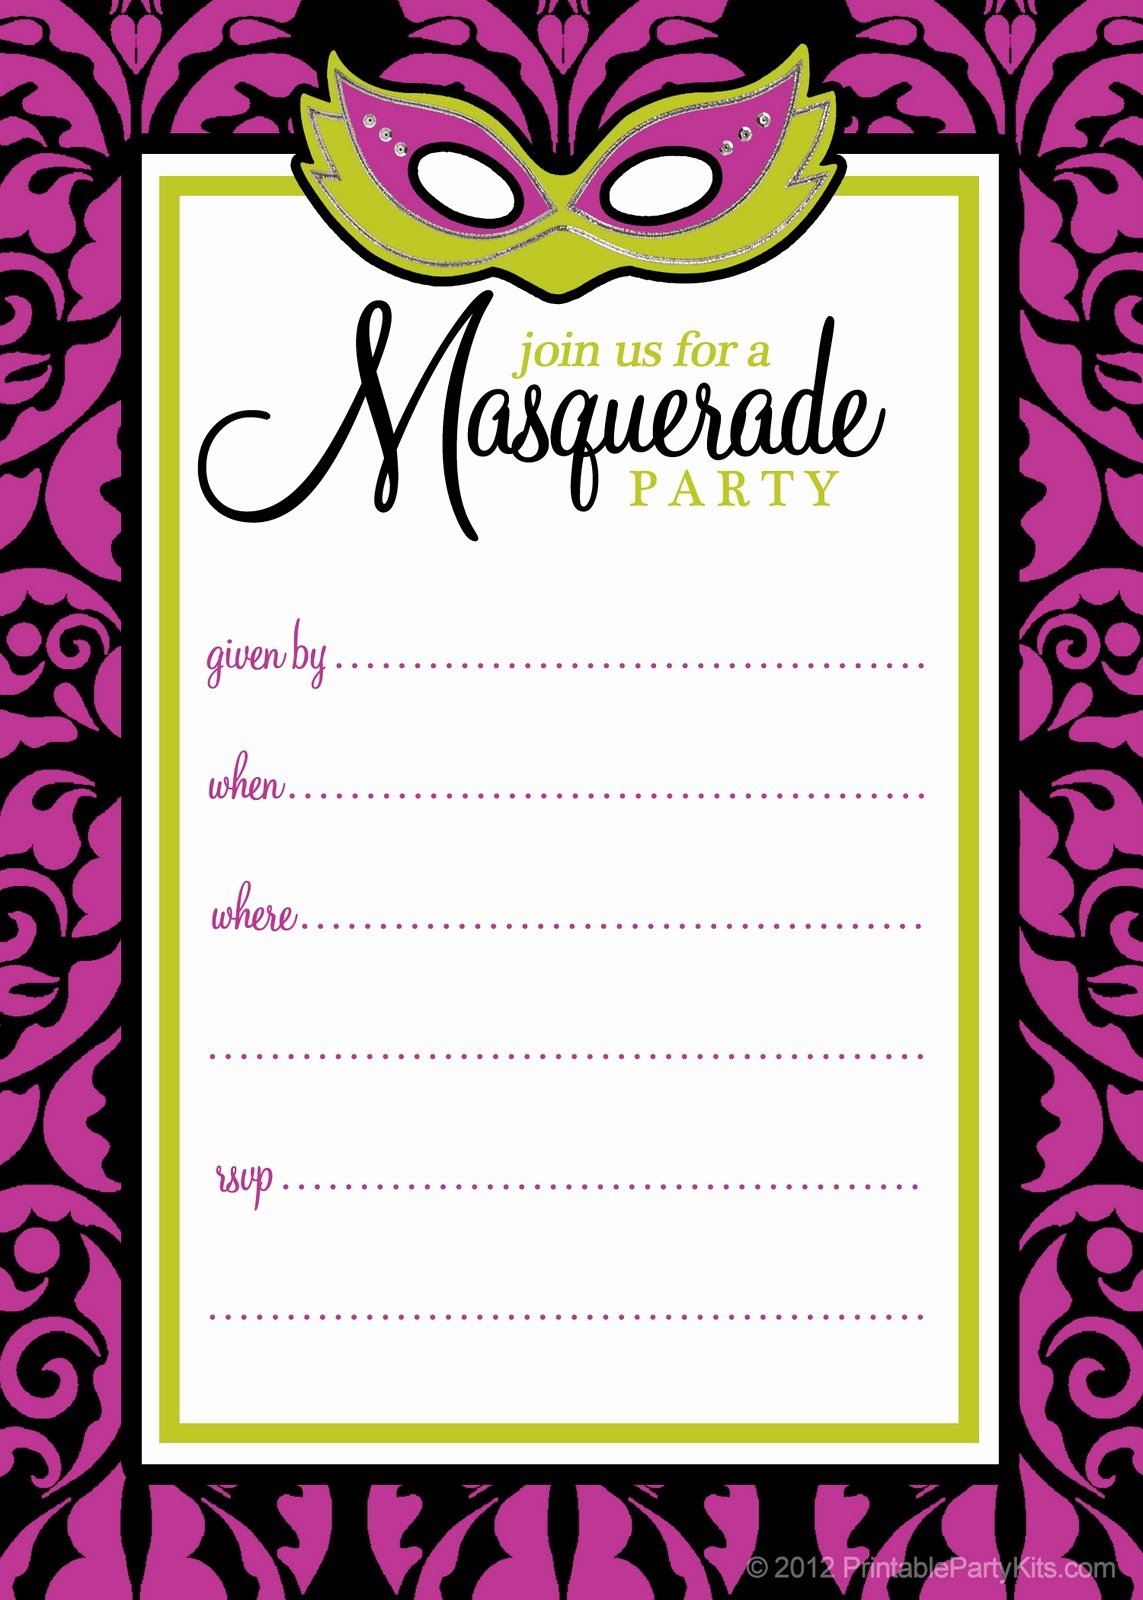 Masquerade Invitations Template Free Awesome Free Printable Party Invitations Masquerade or Mardi Gras Party Invitations